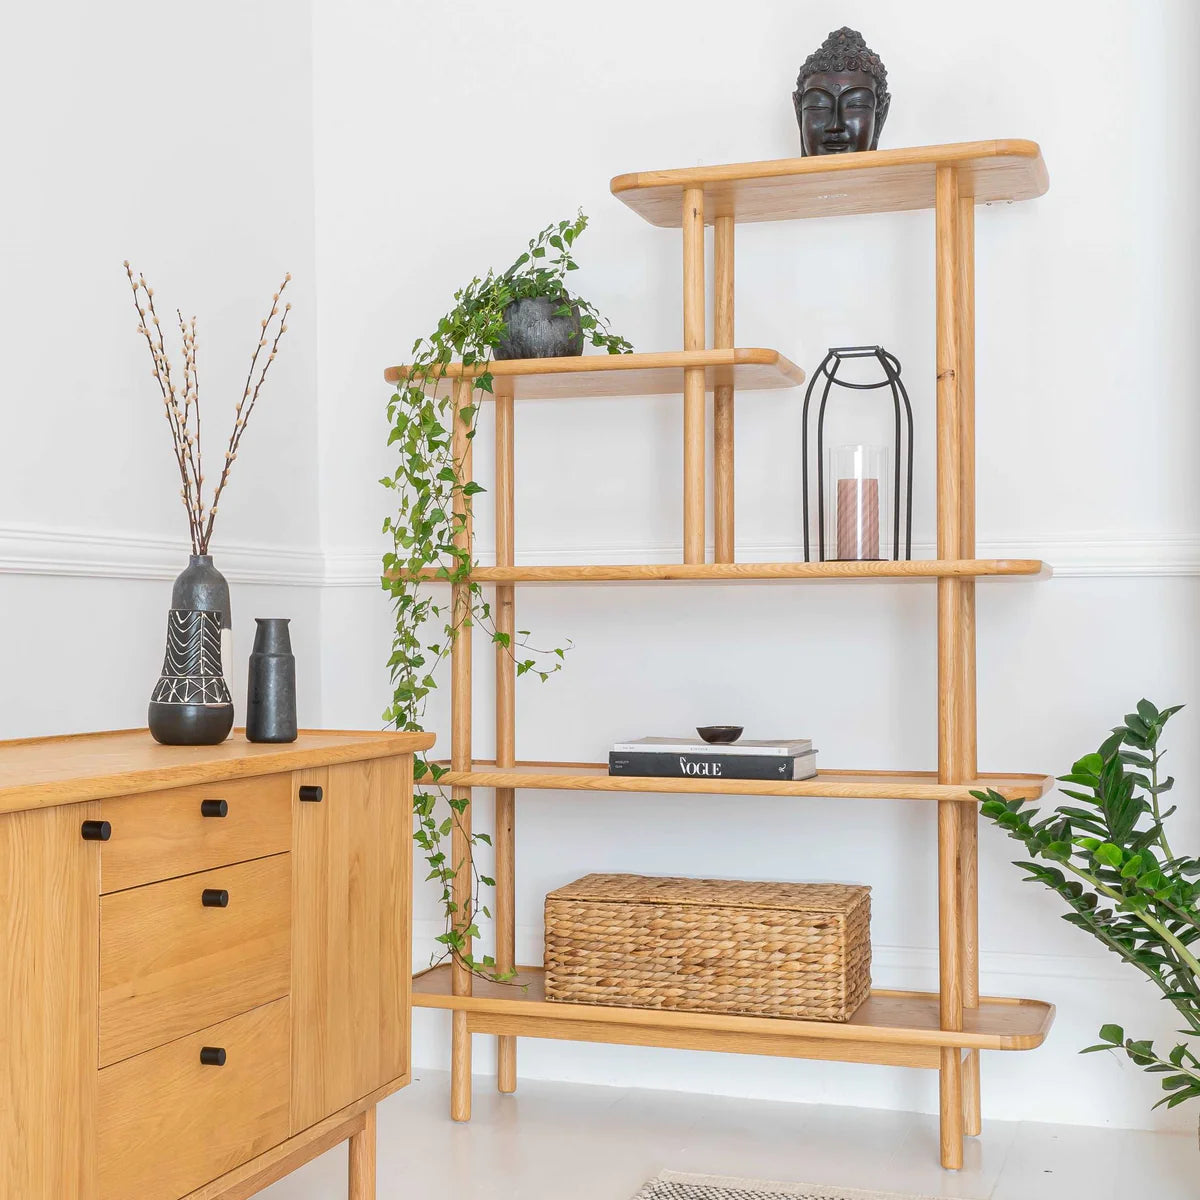 Discover Handmade Storage Products from Cornwall